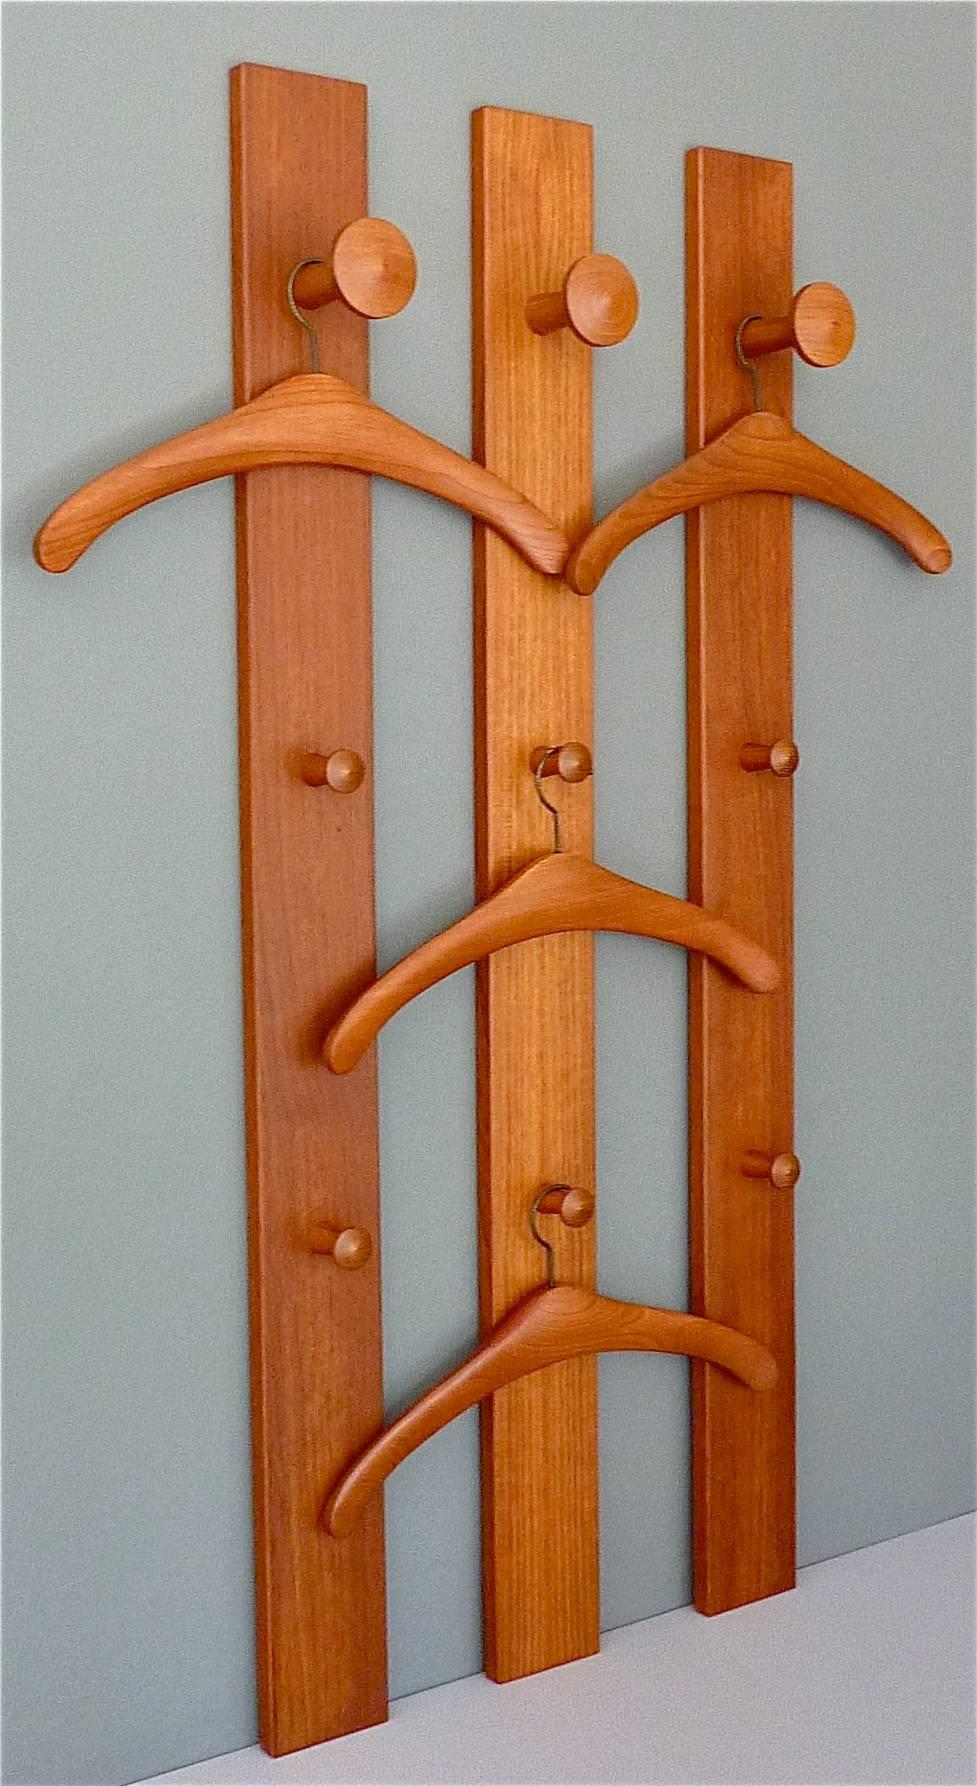 Fabulous set of three solid teak coat rack panels or wardrobe with four beautifully organic formed teak hangers designed and manufactured in the 1960s by Aksel Kjersgaard Odder in Denmark. The designs by master cabinet maker Aksel Kjersgaard have